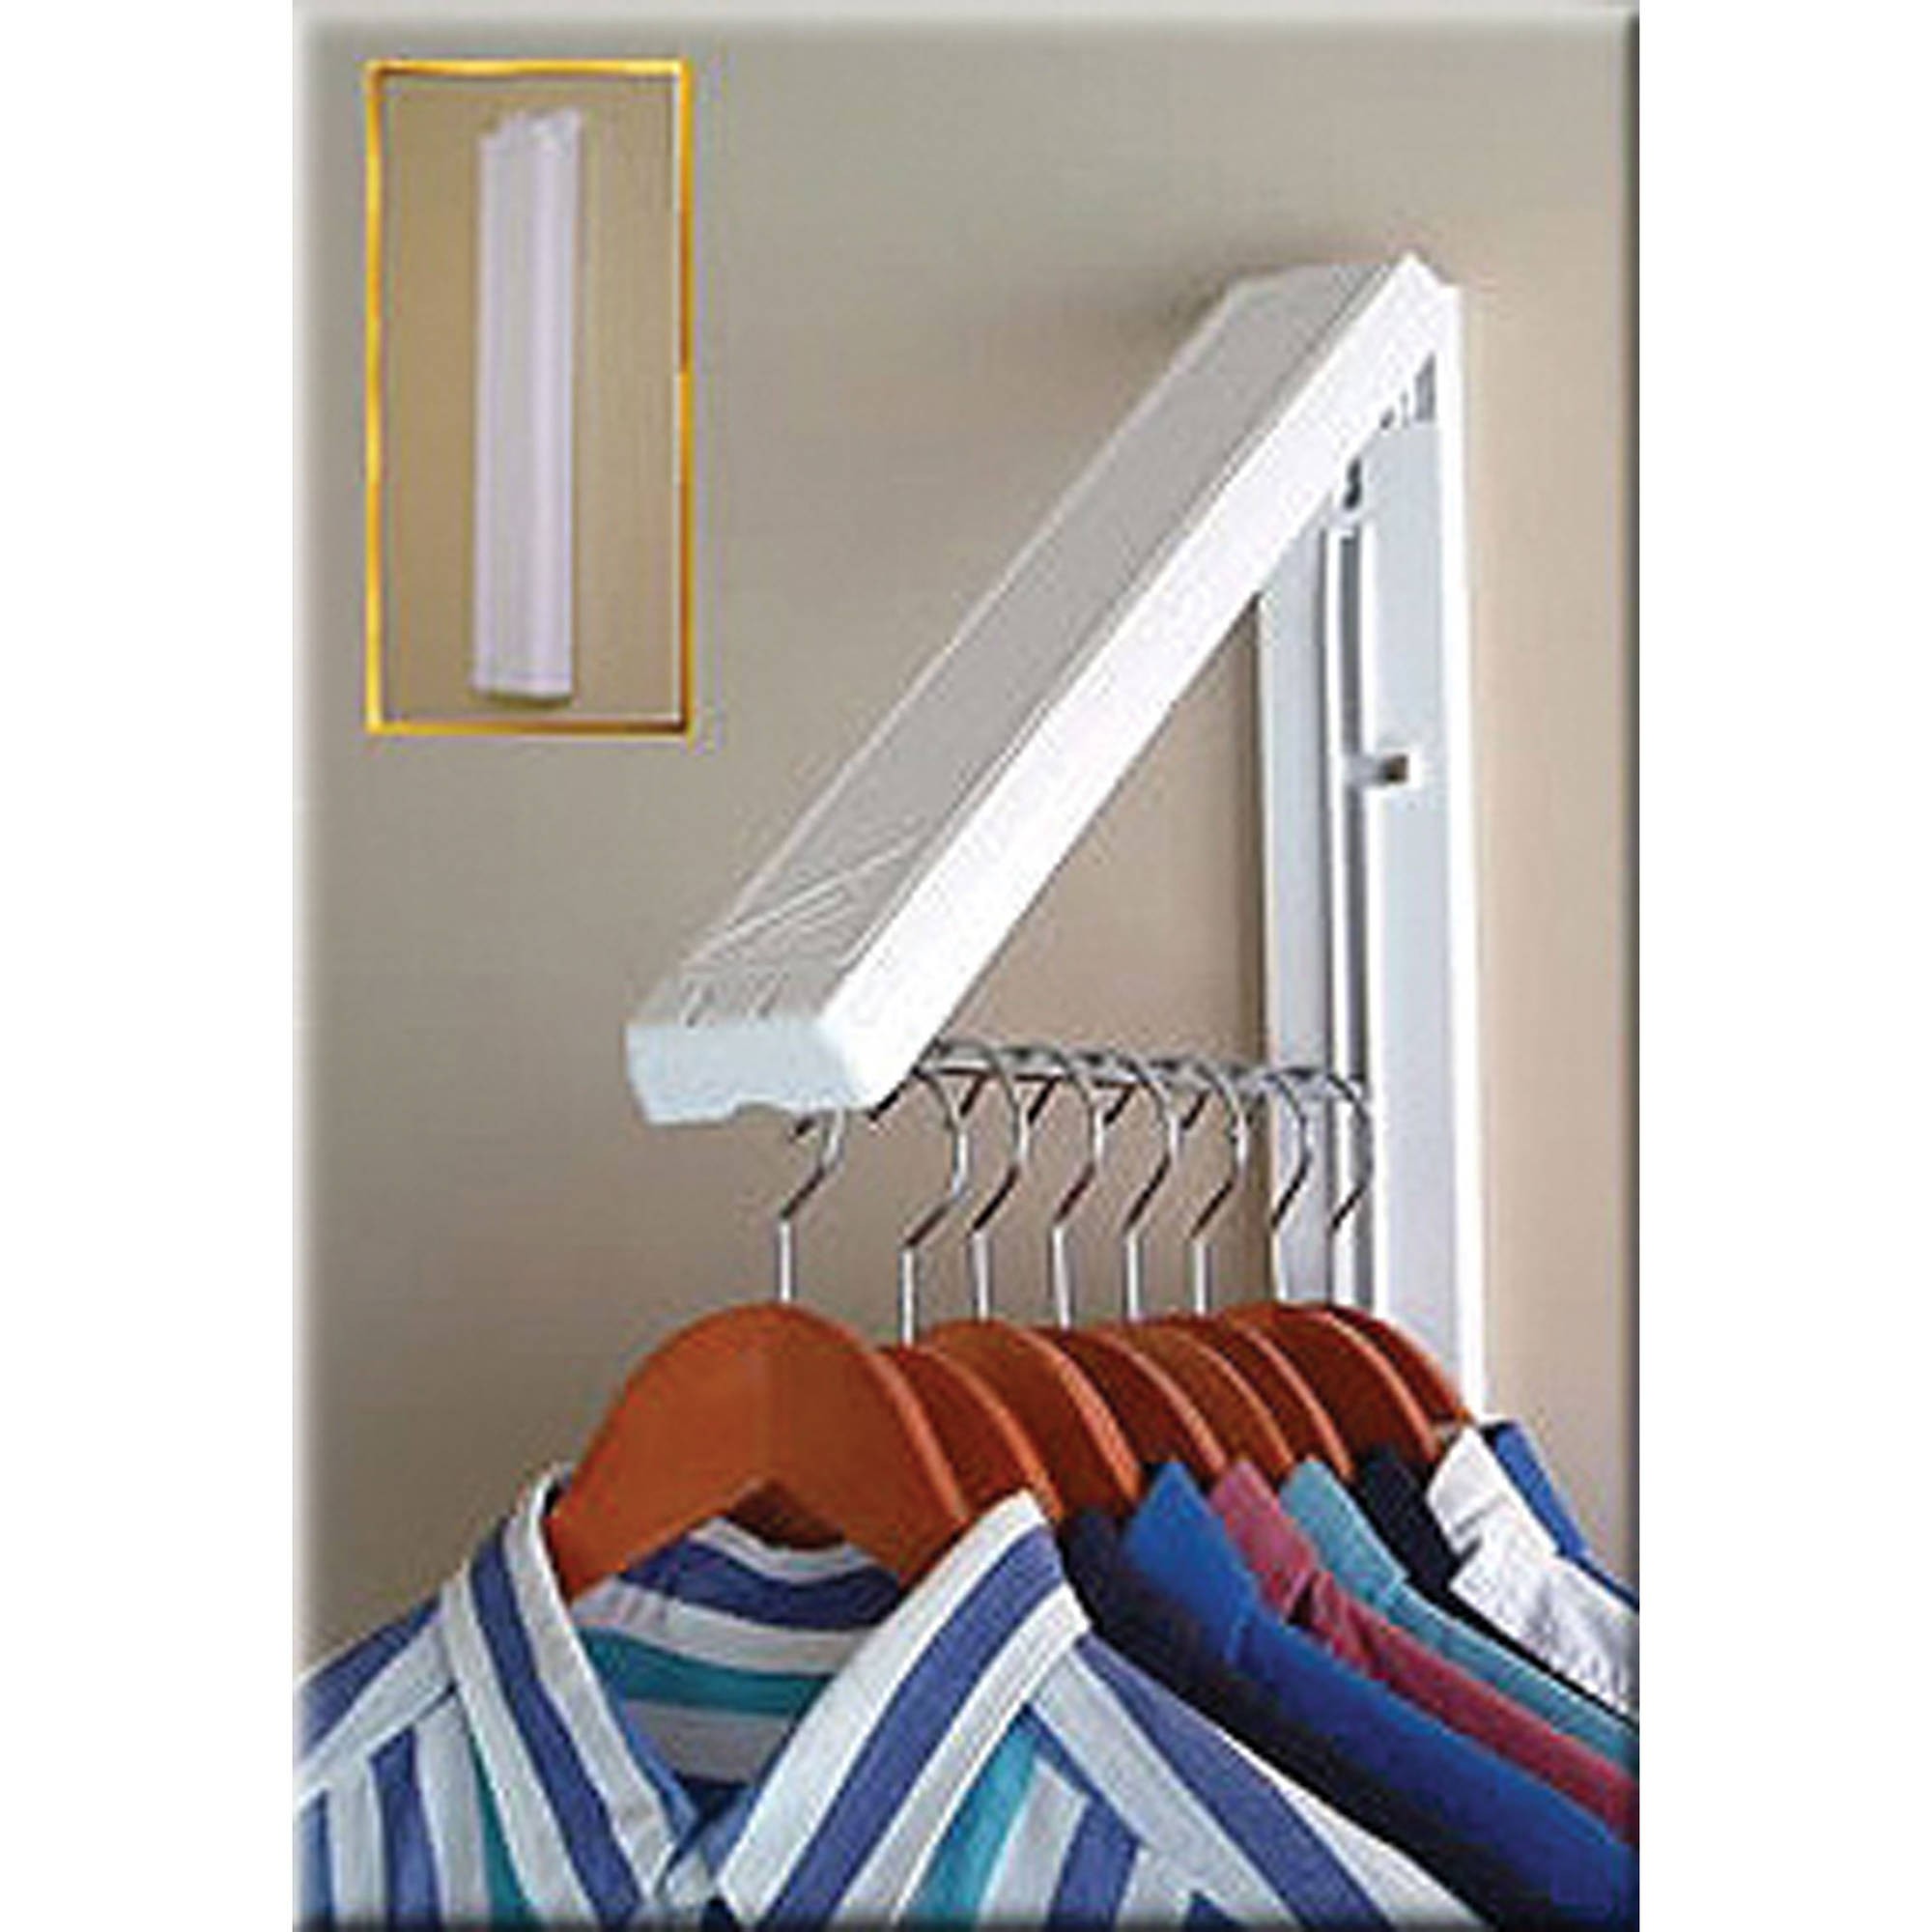 1/2 x Laundry Drying Rack Laundry Drying Rack Wall-Mount Retractable Folding Invisible Clothes Hanger,Material Stainless Steel ABS 